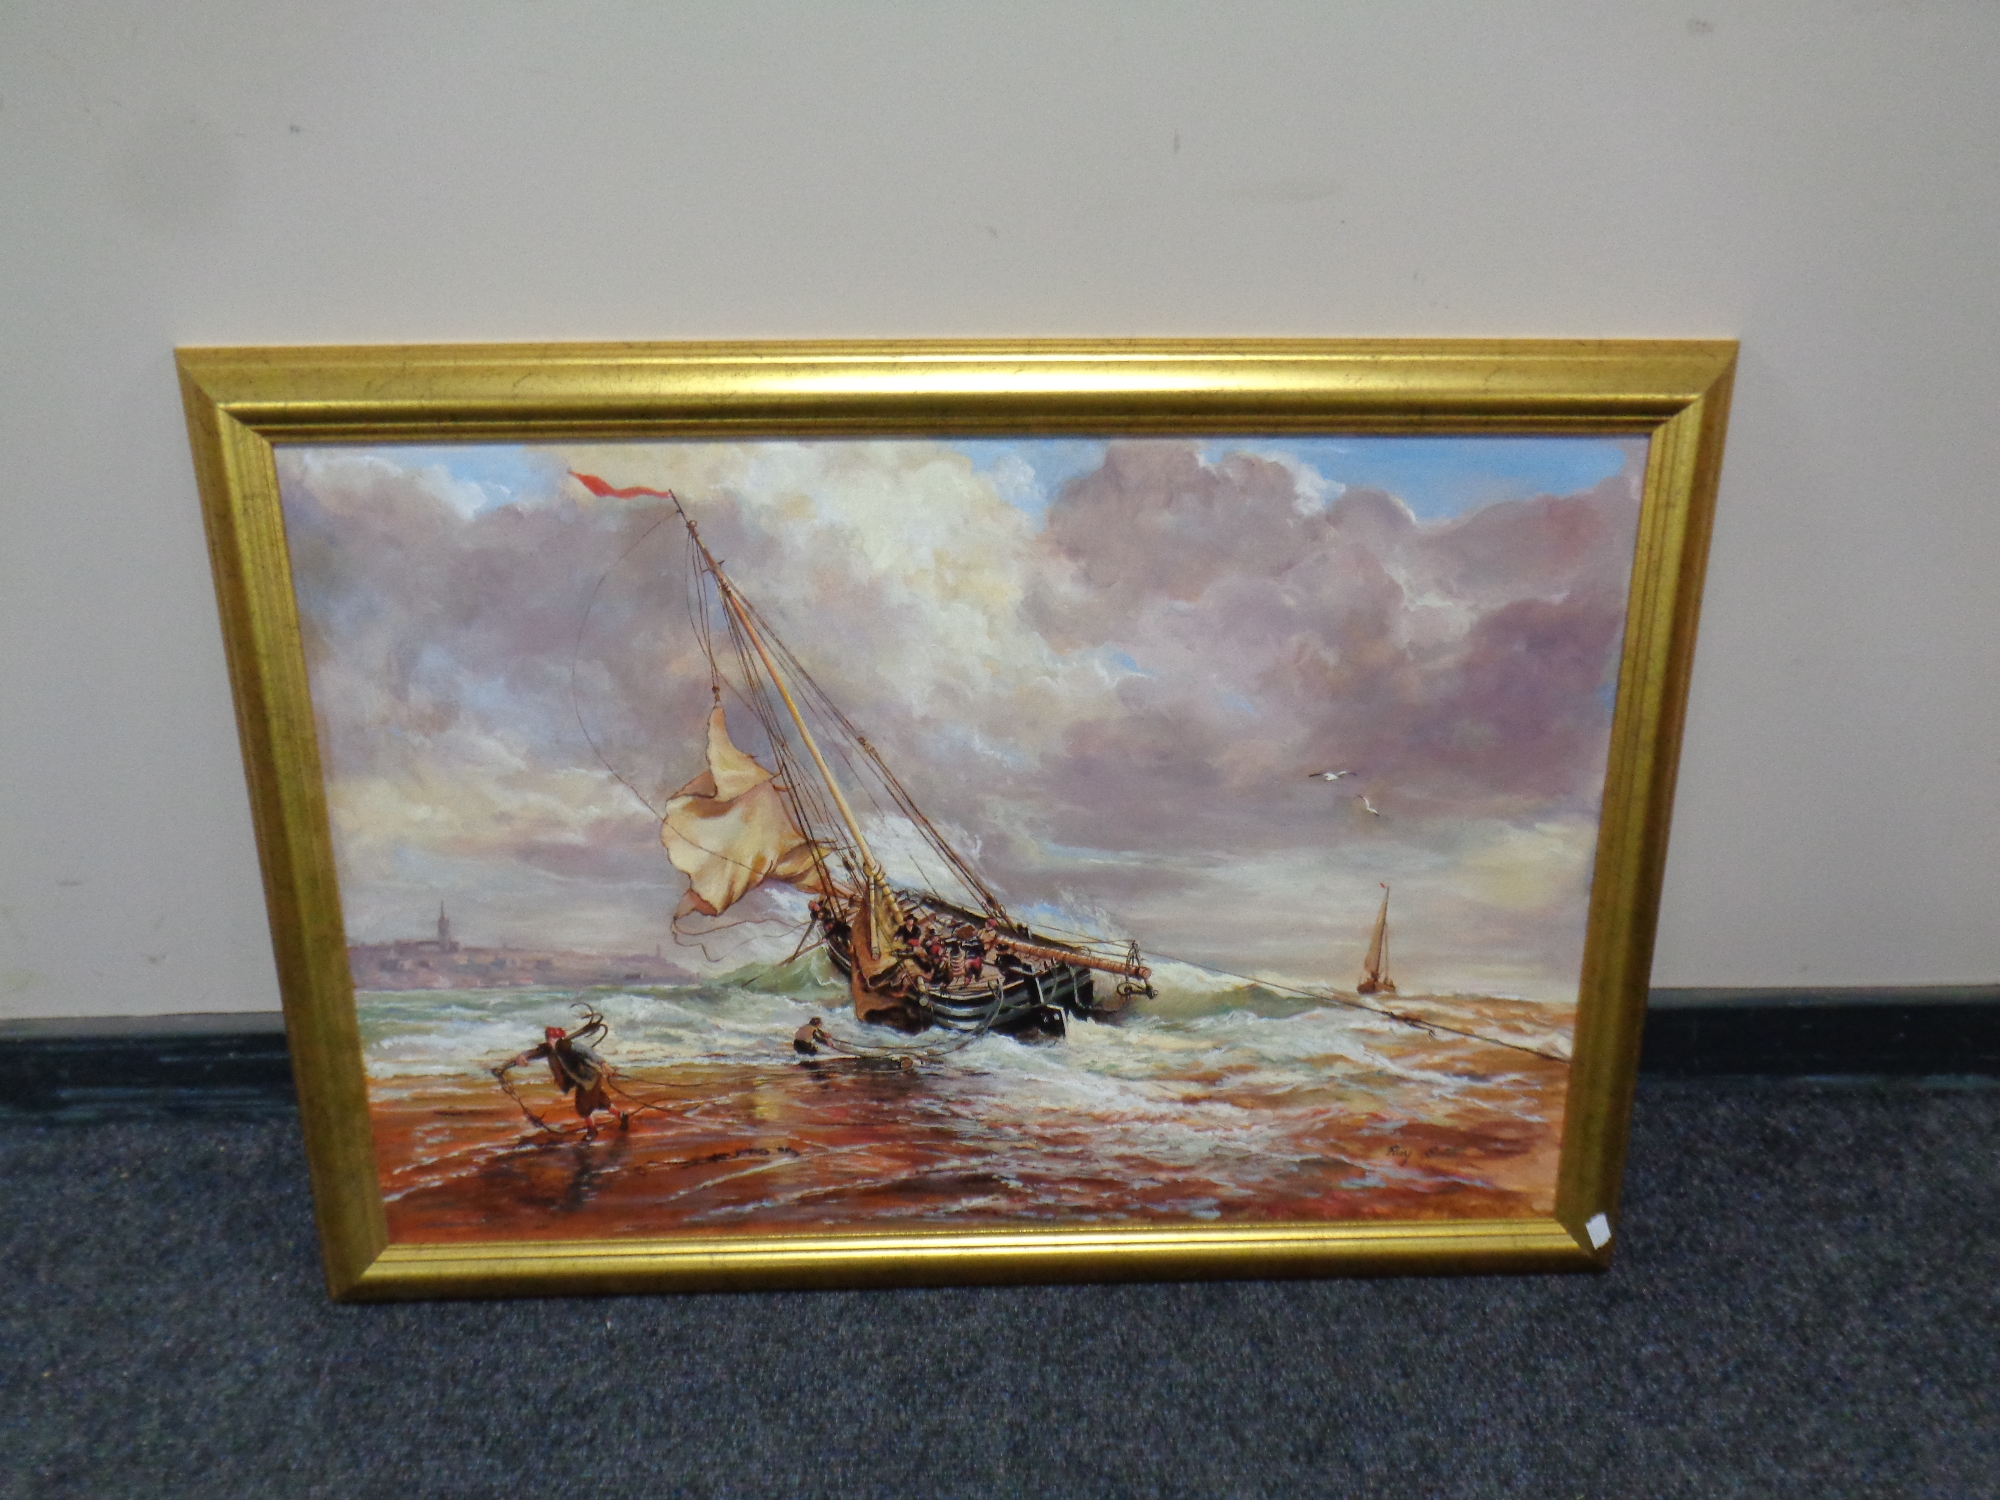 A Ray Smith oil on board depicting a sailing boat in choppy seas